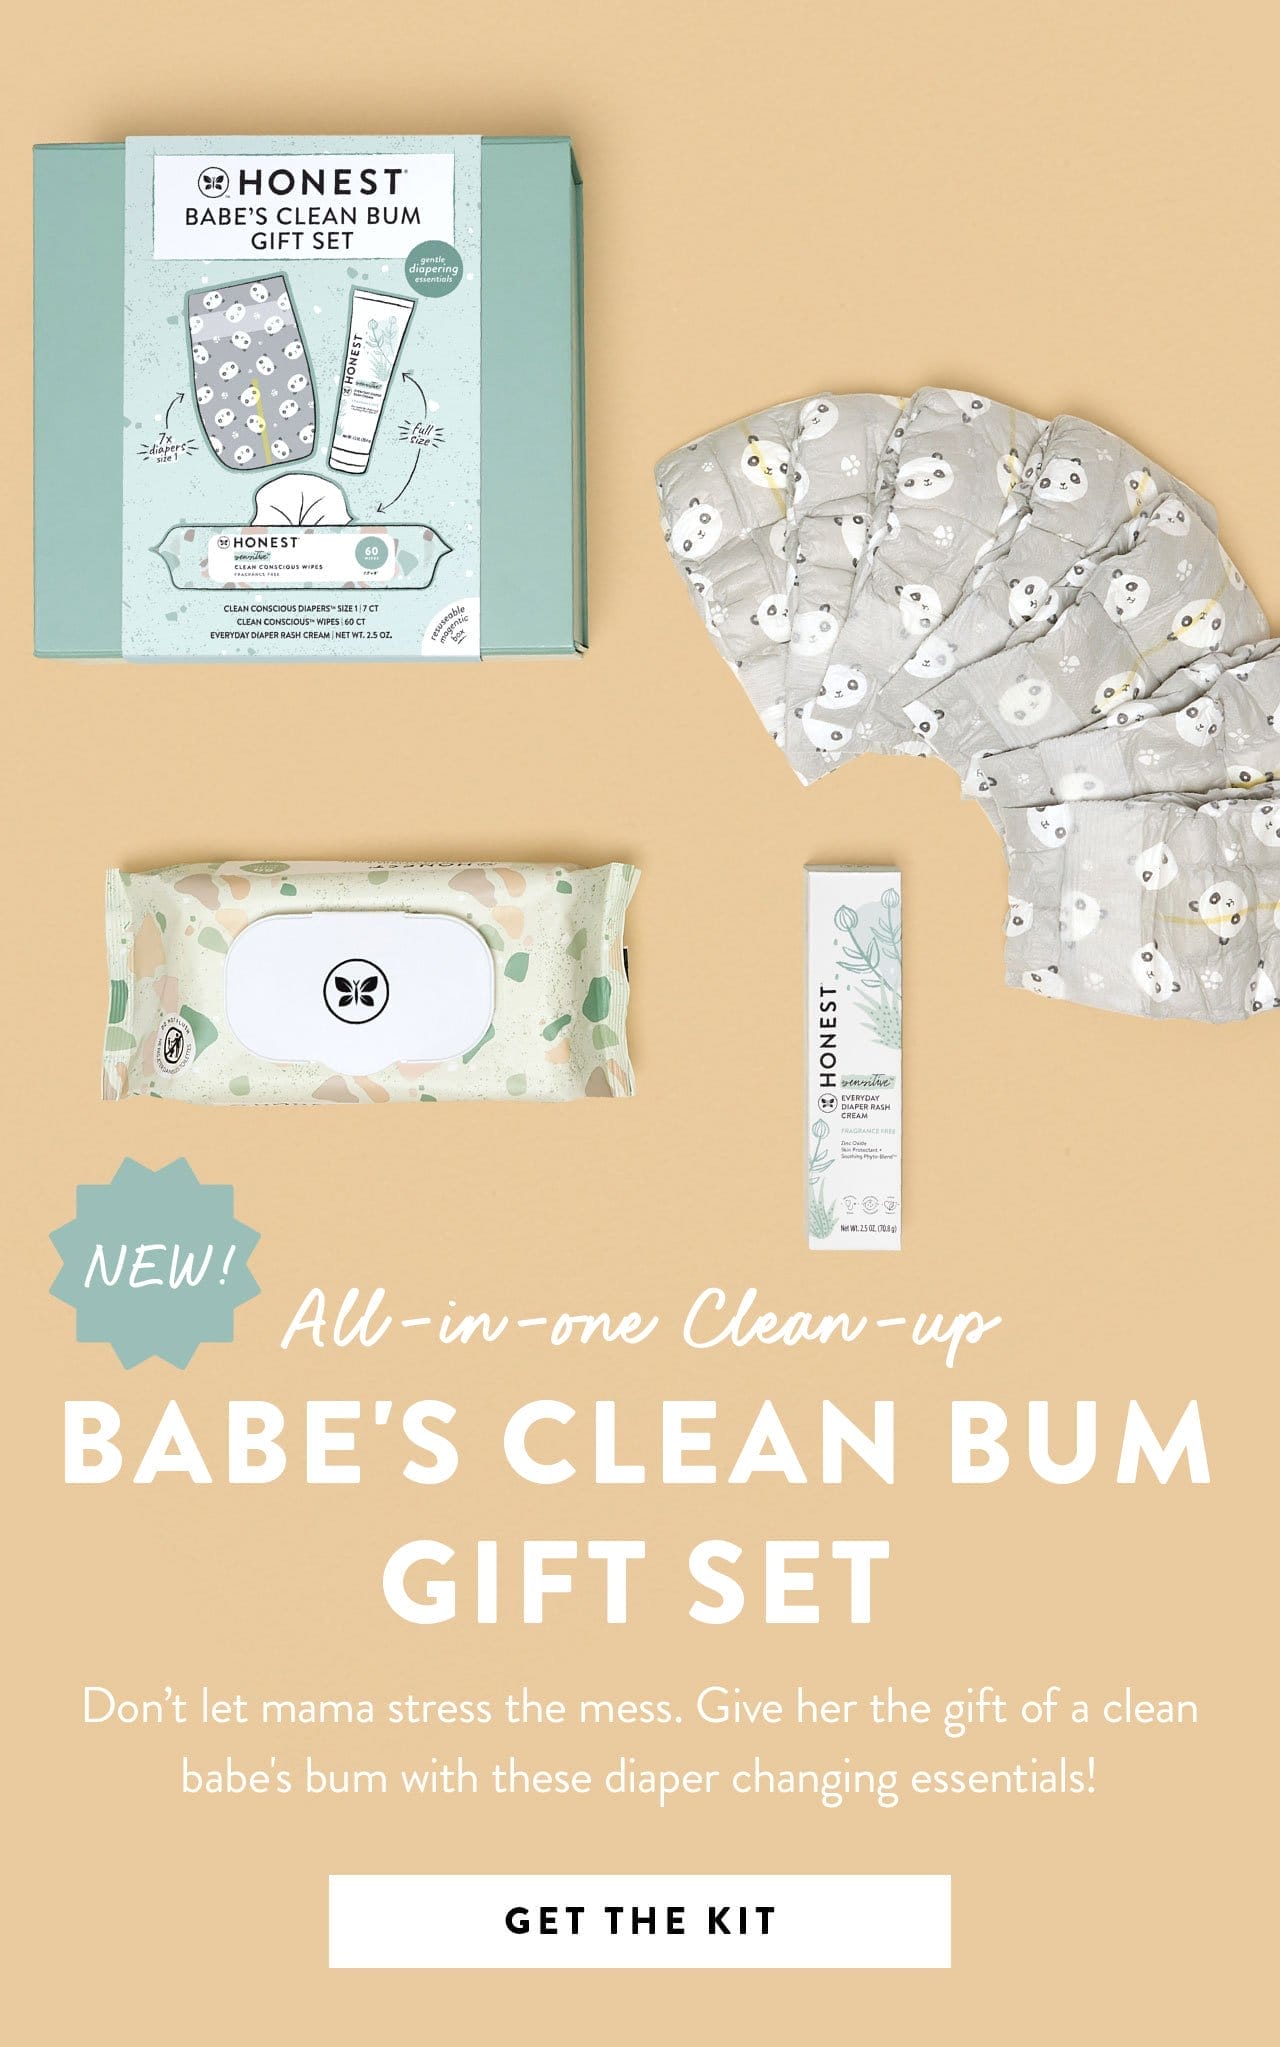 NEW! Babe's Clean Bum Gift Set